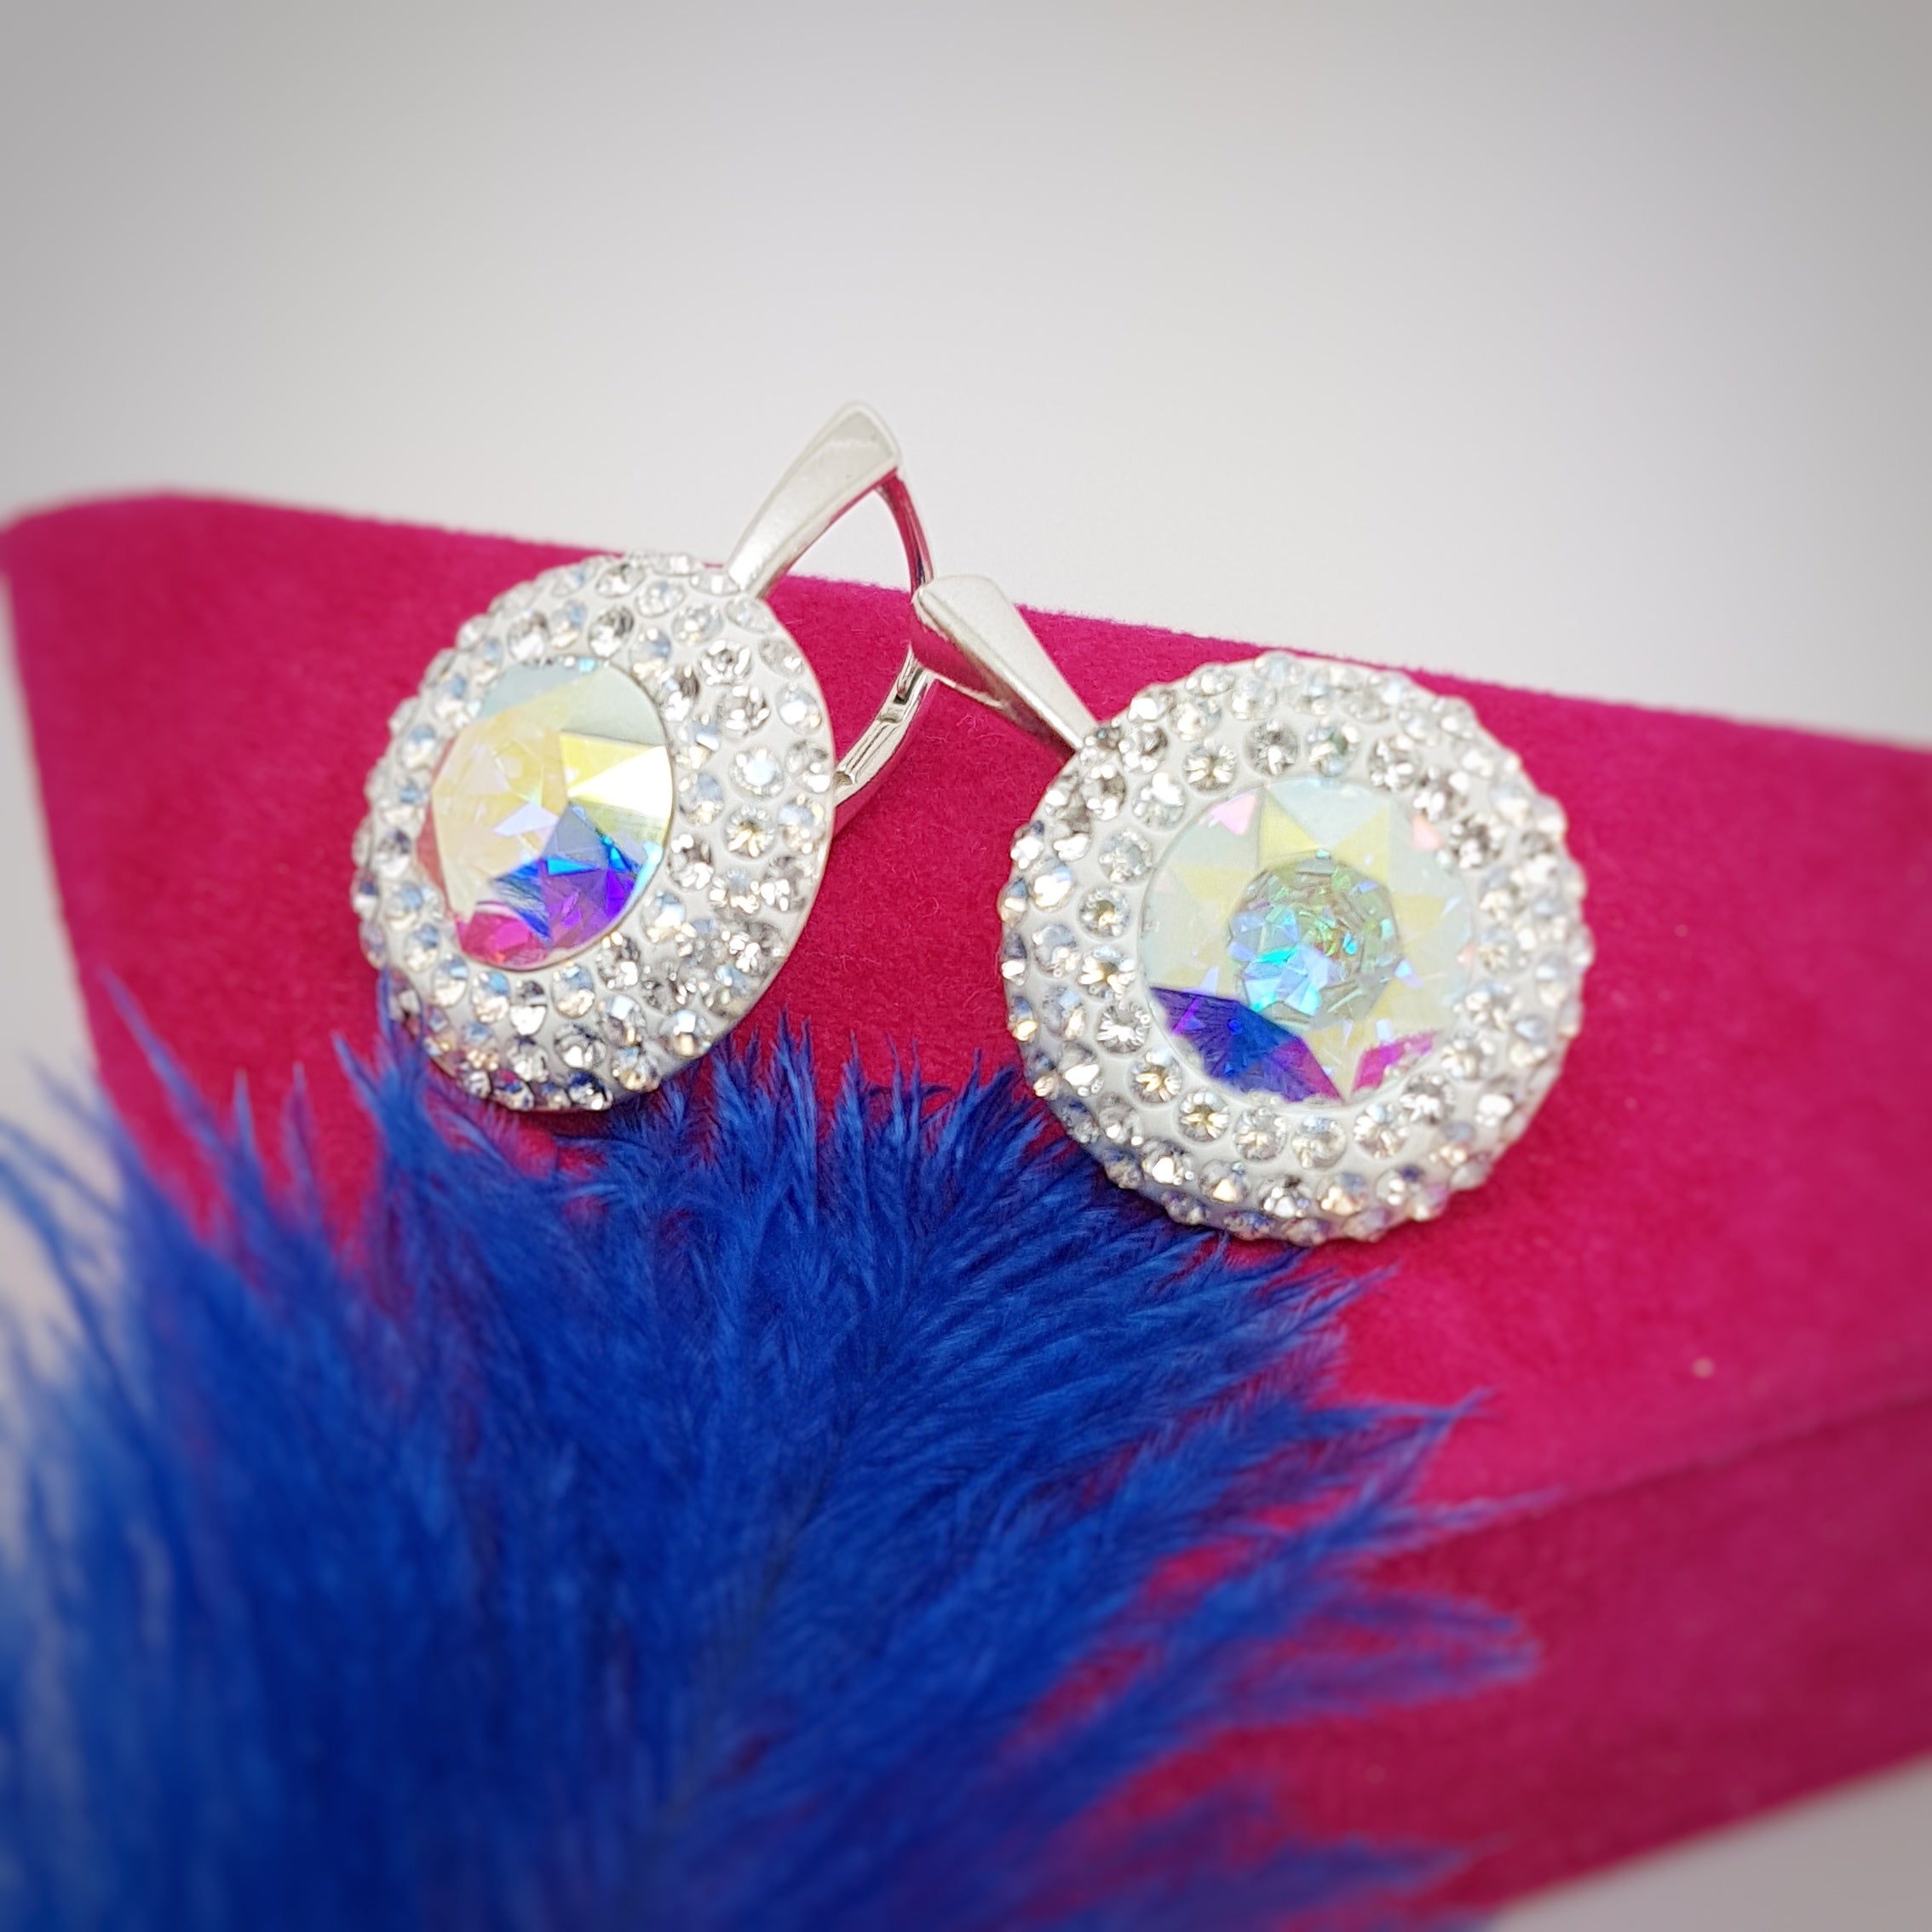 Extra Large Drop Leverback Earrings | Bridal Sparkly Earrings, [product type], - Personalised Silver Jewellery Ireland by Magpie Gems